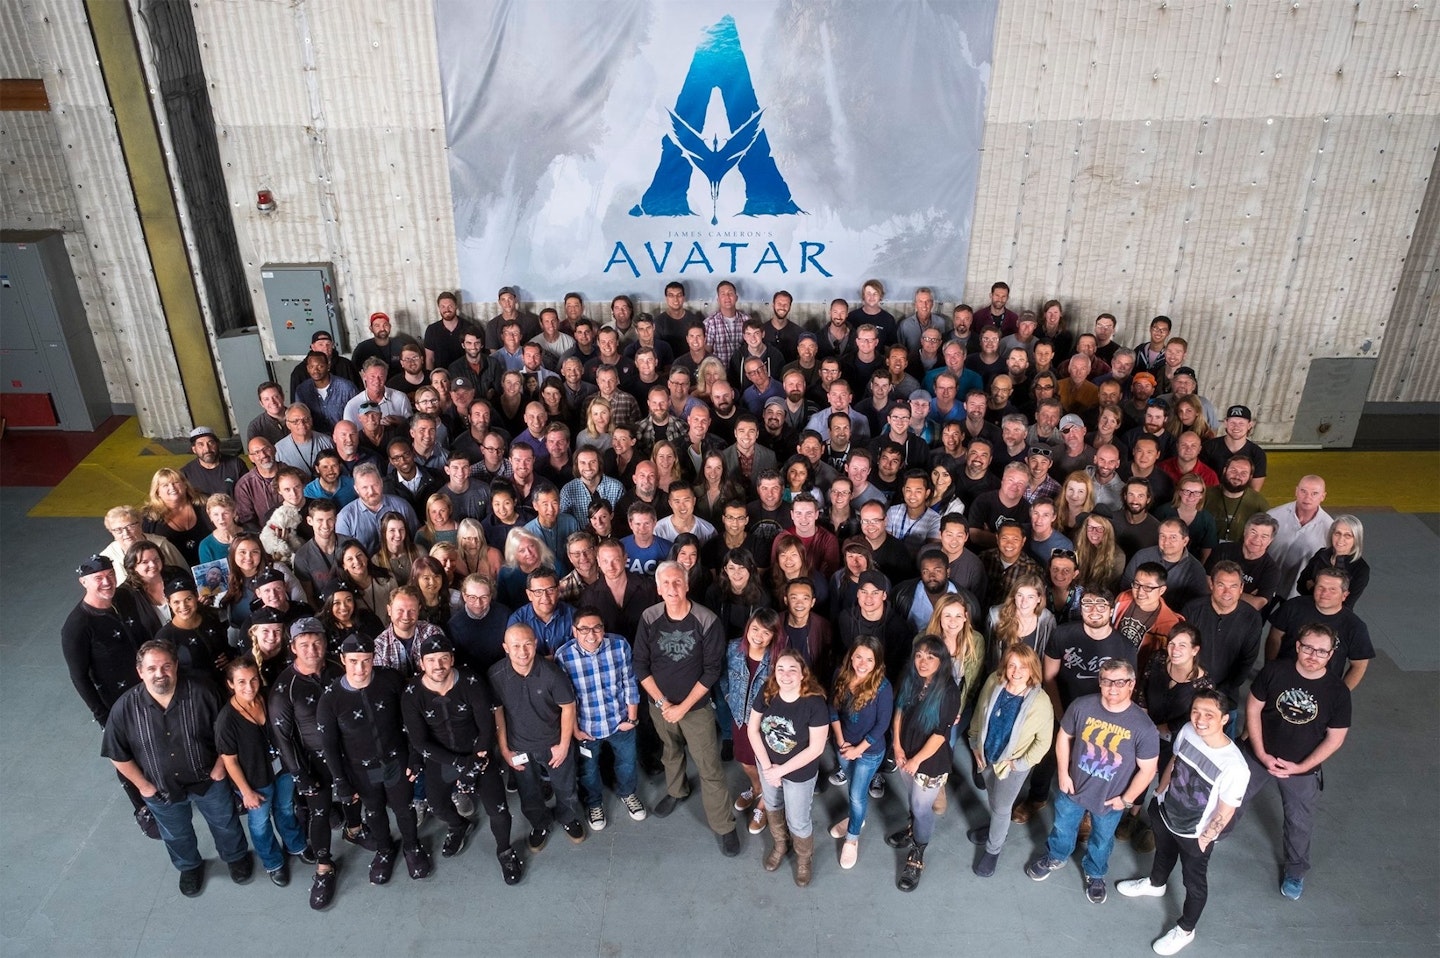 James Cameron and the Avatar sequel crew